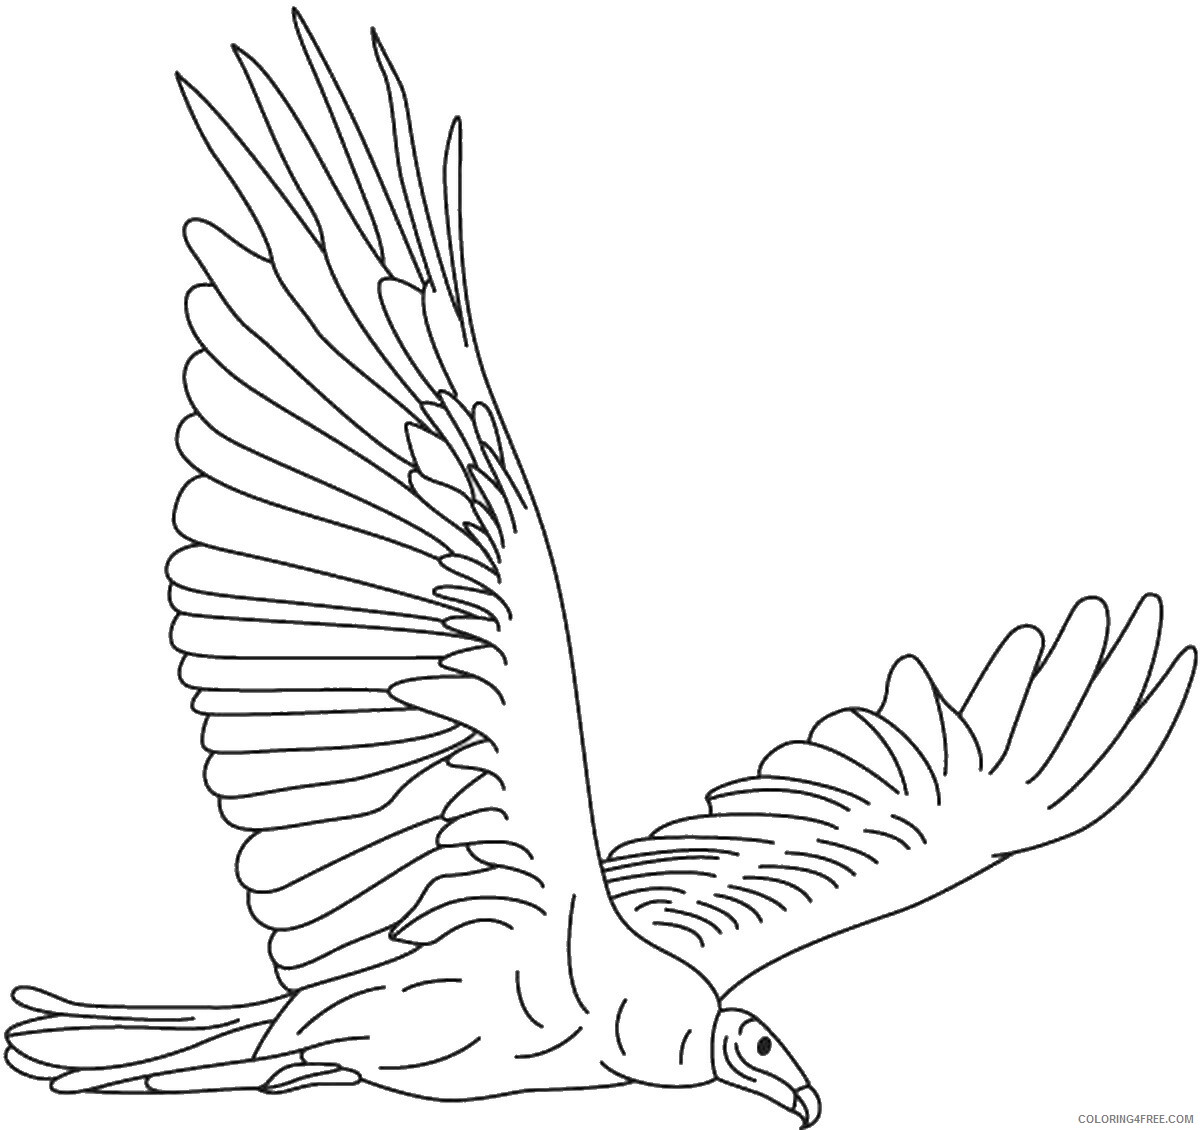 Eagle Coloring Pages Animal Printable Sheets eagle 5 2021 1875 Coloring4free